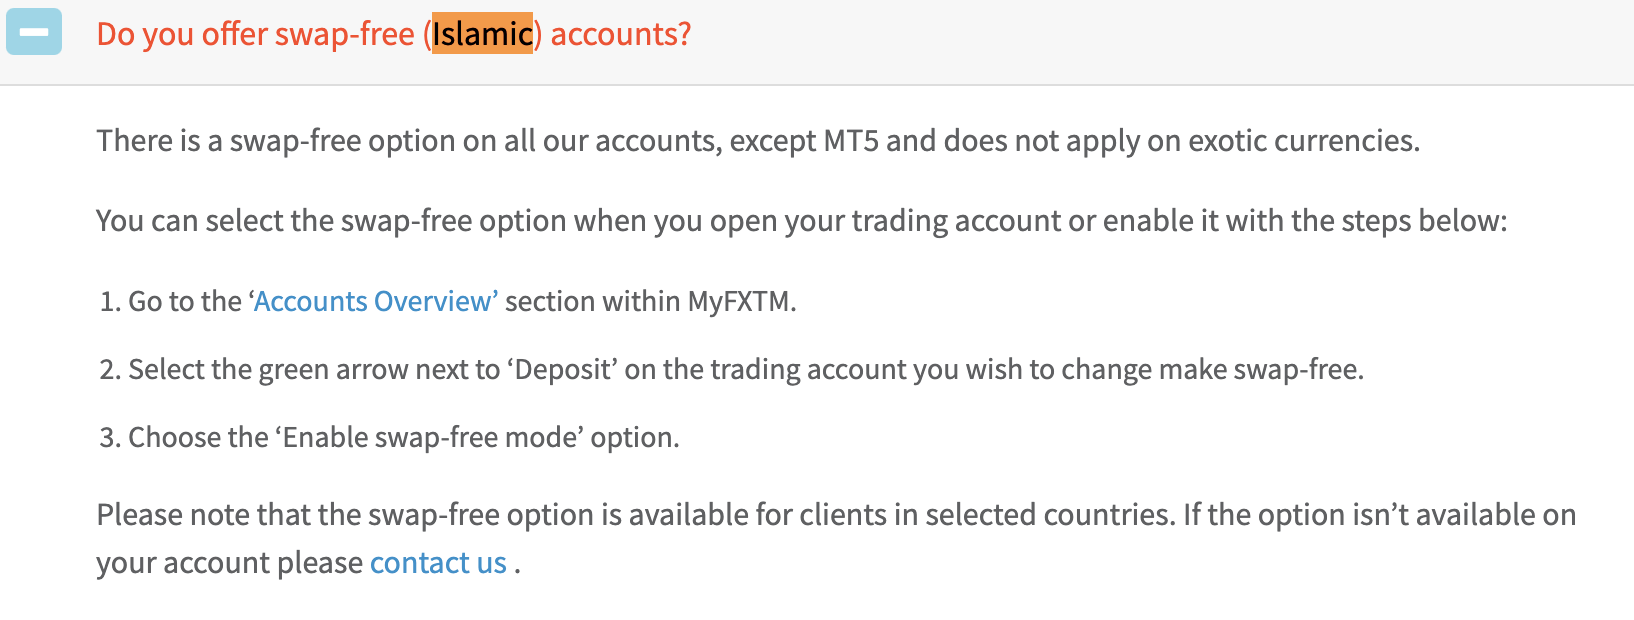 A quick overview for islamic accounts at FXTM